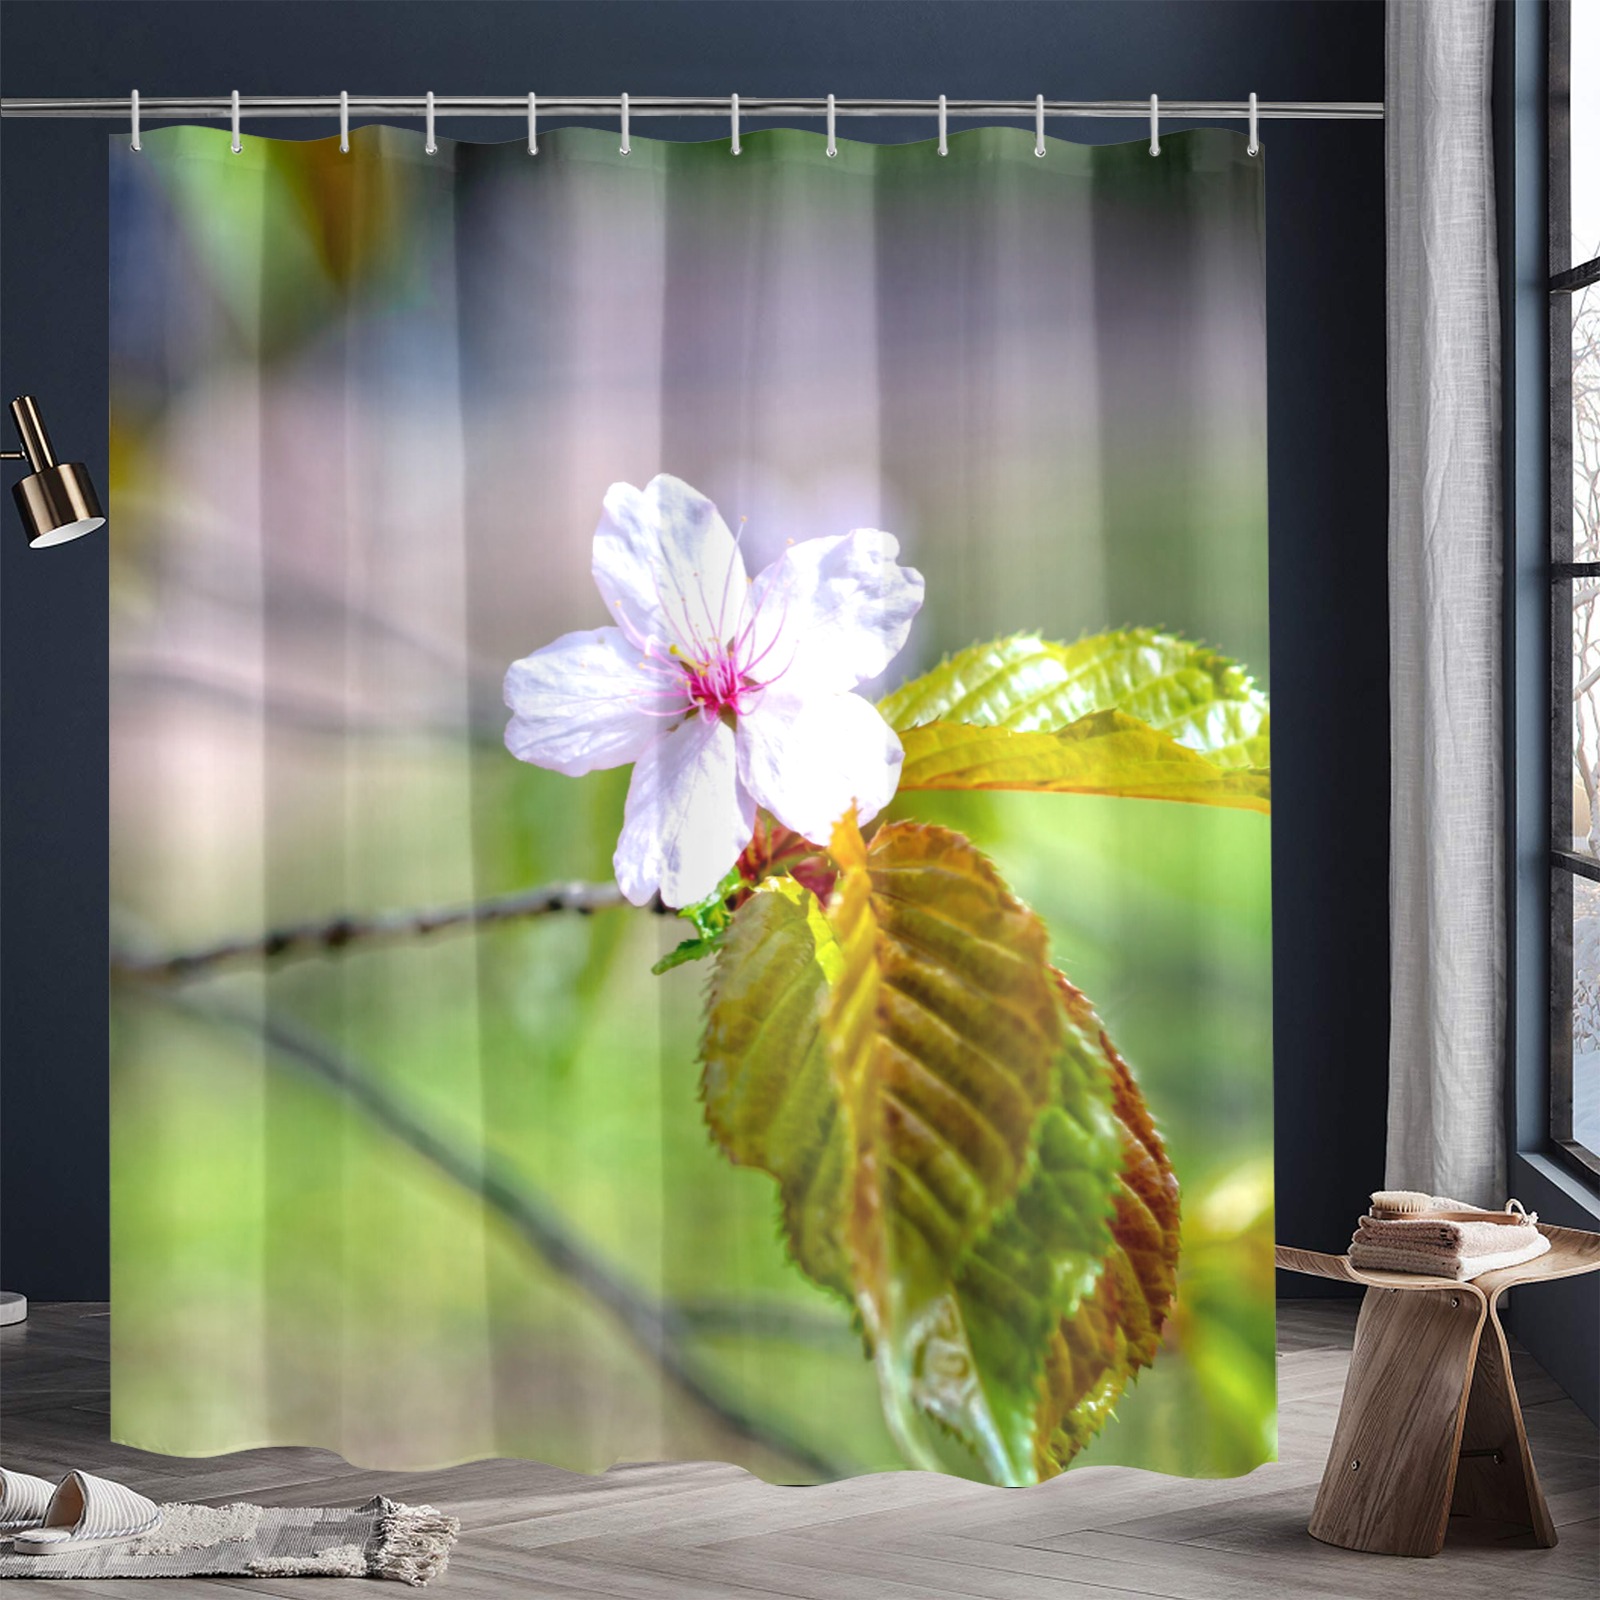 One sakura cherry flowers on a tree in spring. Shower Curtain 72"x84"